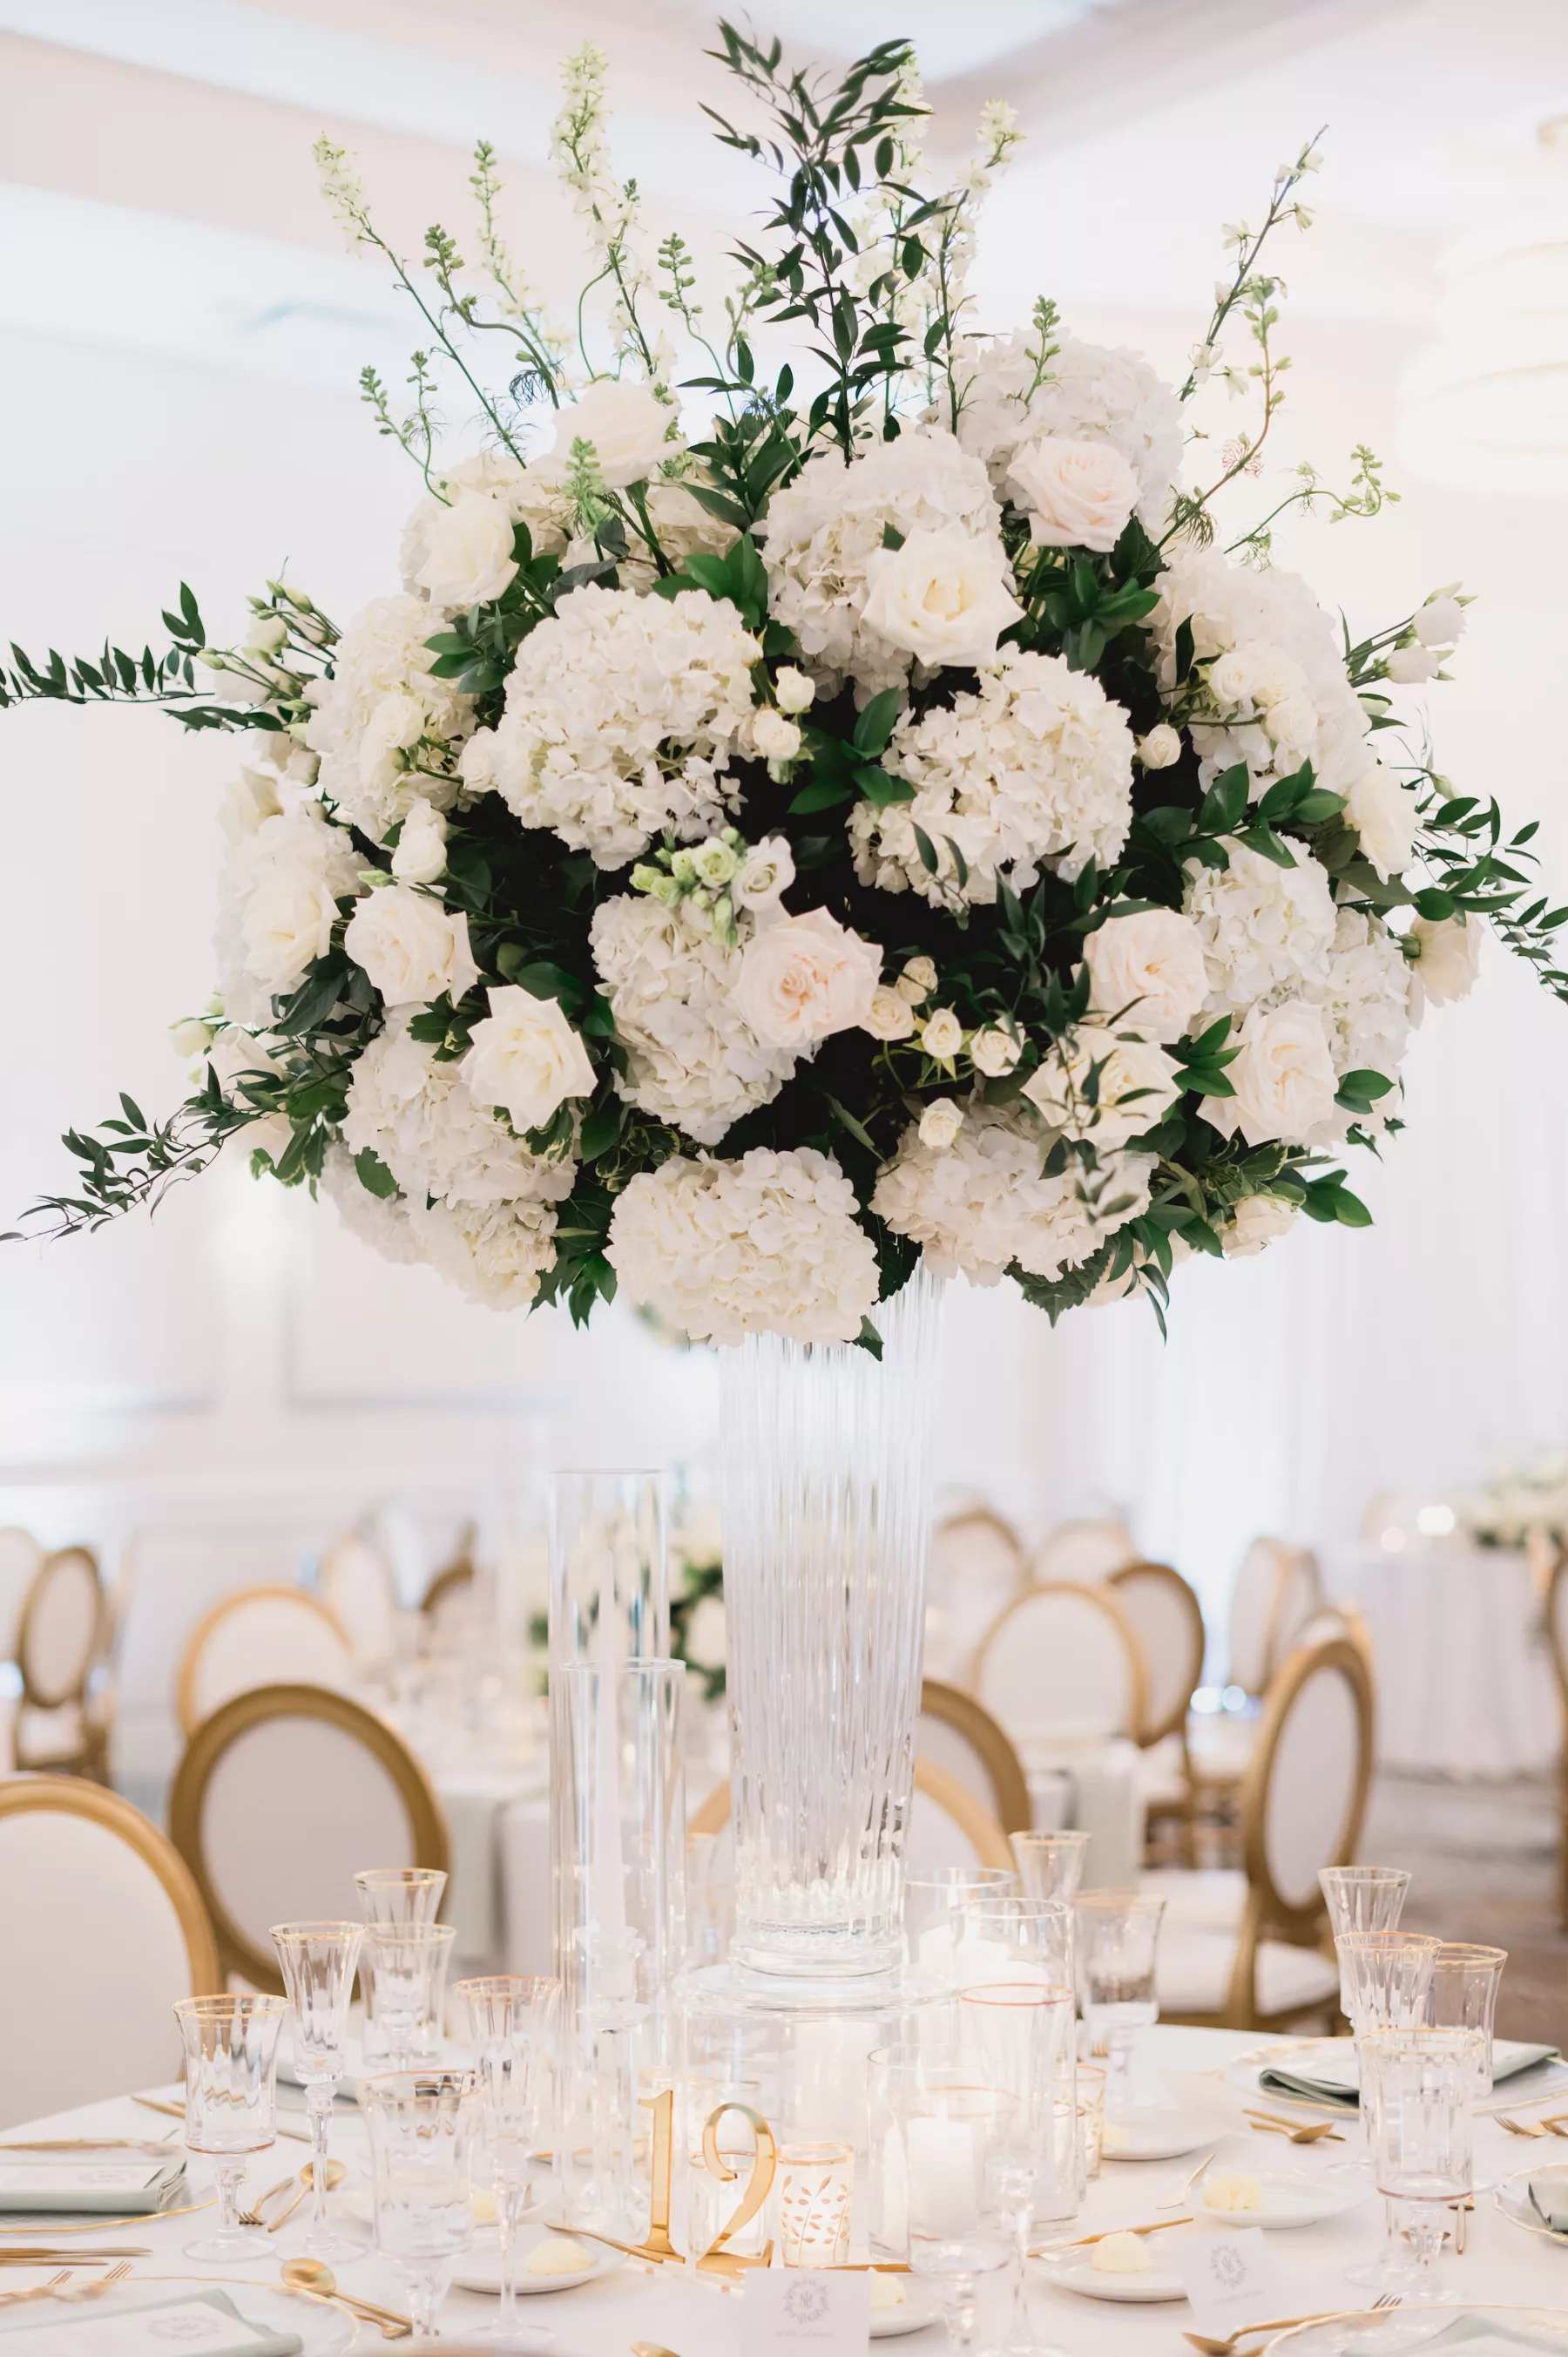 Elegant Spring White and Gold Ballroom Wedding Centerpiece Decor Ideas | White Hydrangeas, Roses, and Greenery with Tall Glass Vase | Tampa Bay Florist Bruce Wayne Florals